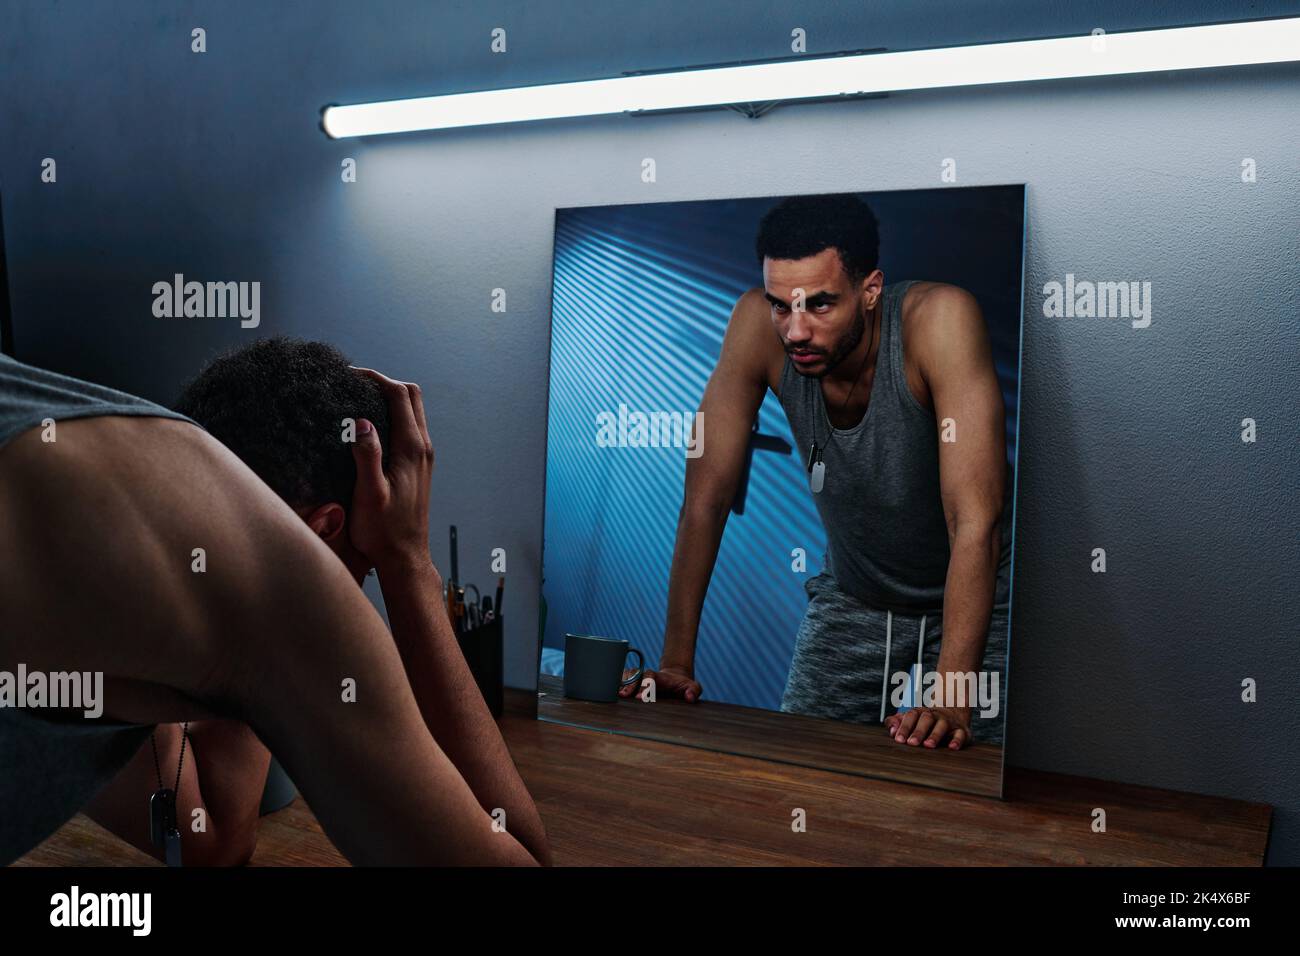 Young insomniac man holding head in hands in front of mirror with reflection of him expressing anger and aggression Stock Photo